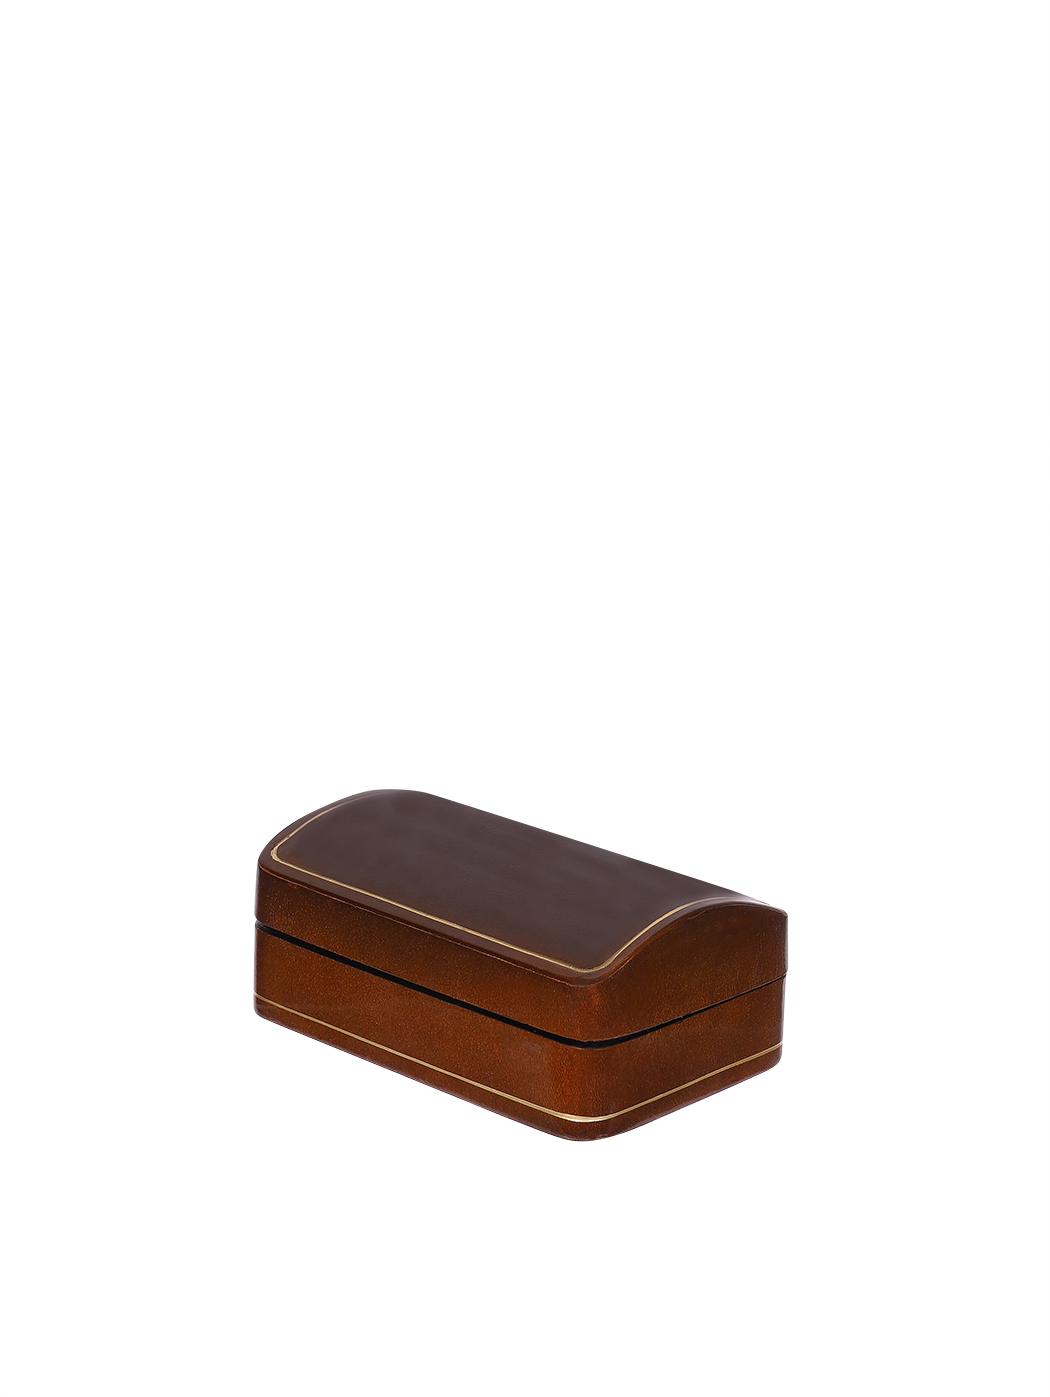 Small Decorative Box Molded Leather Brown